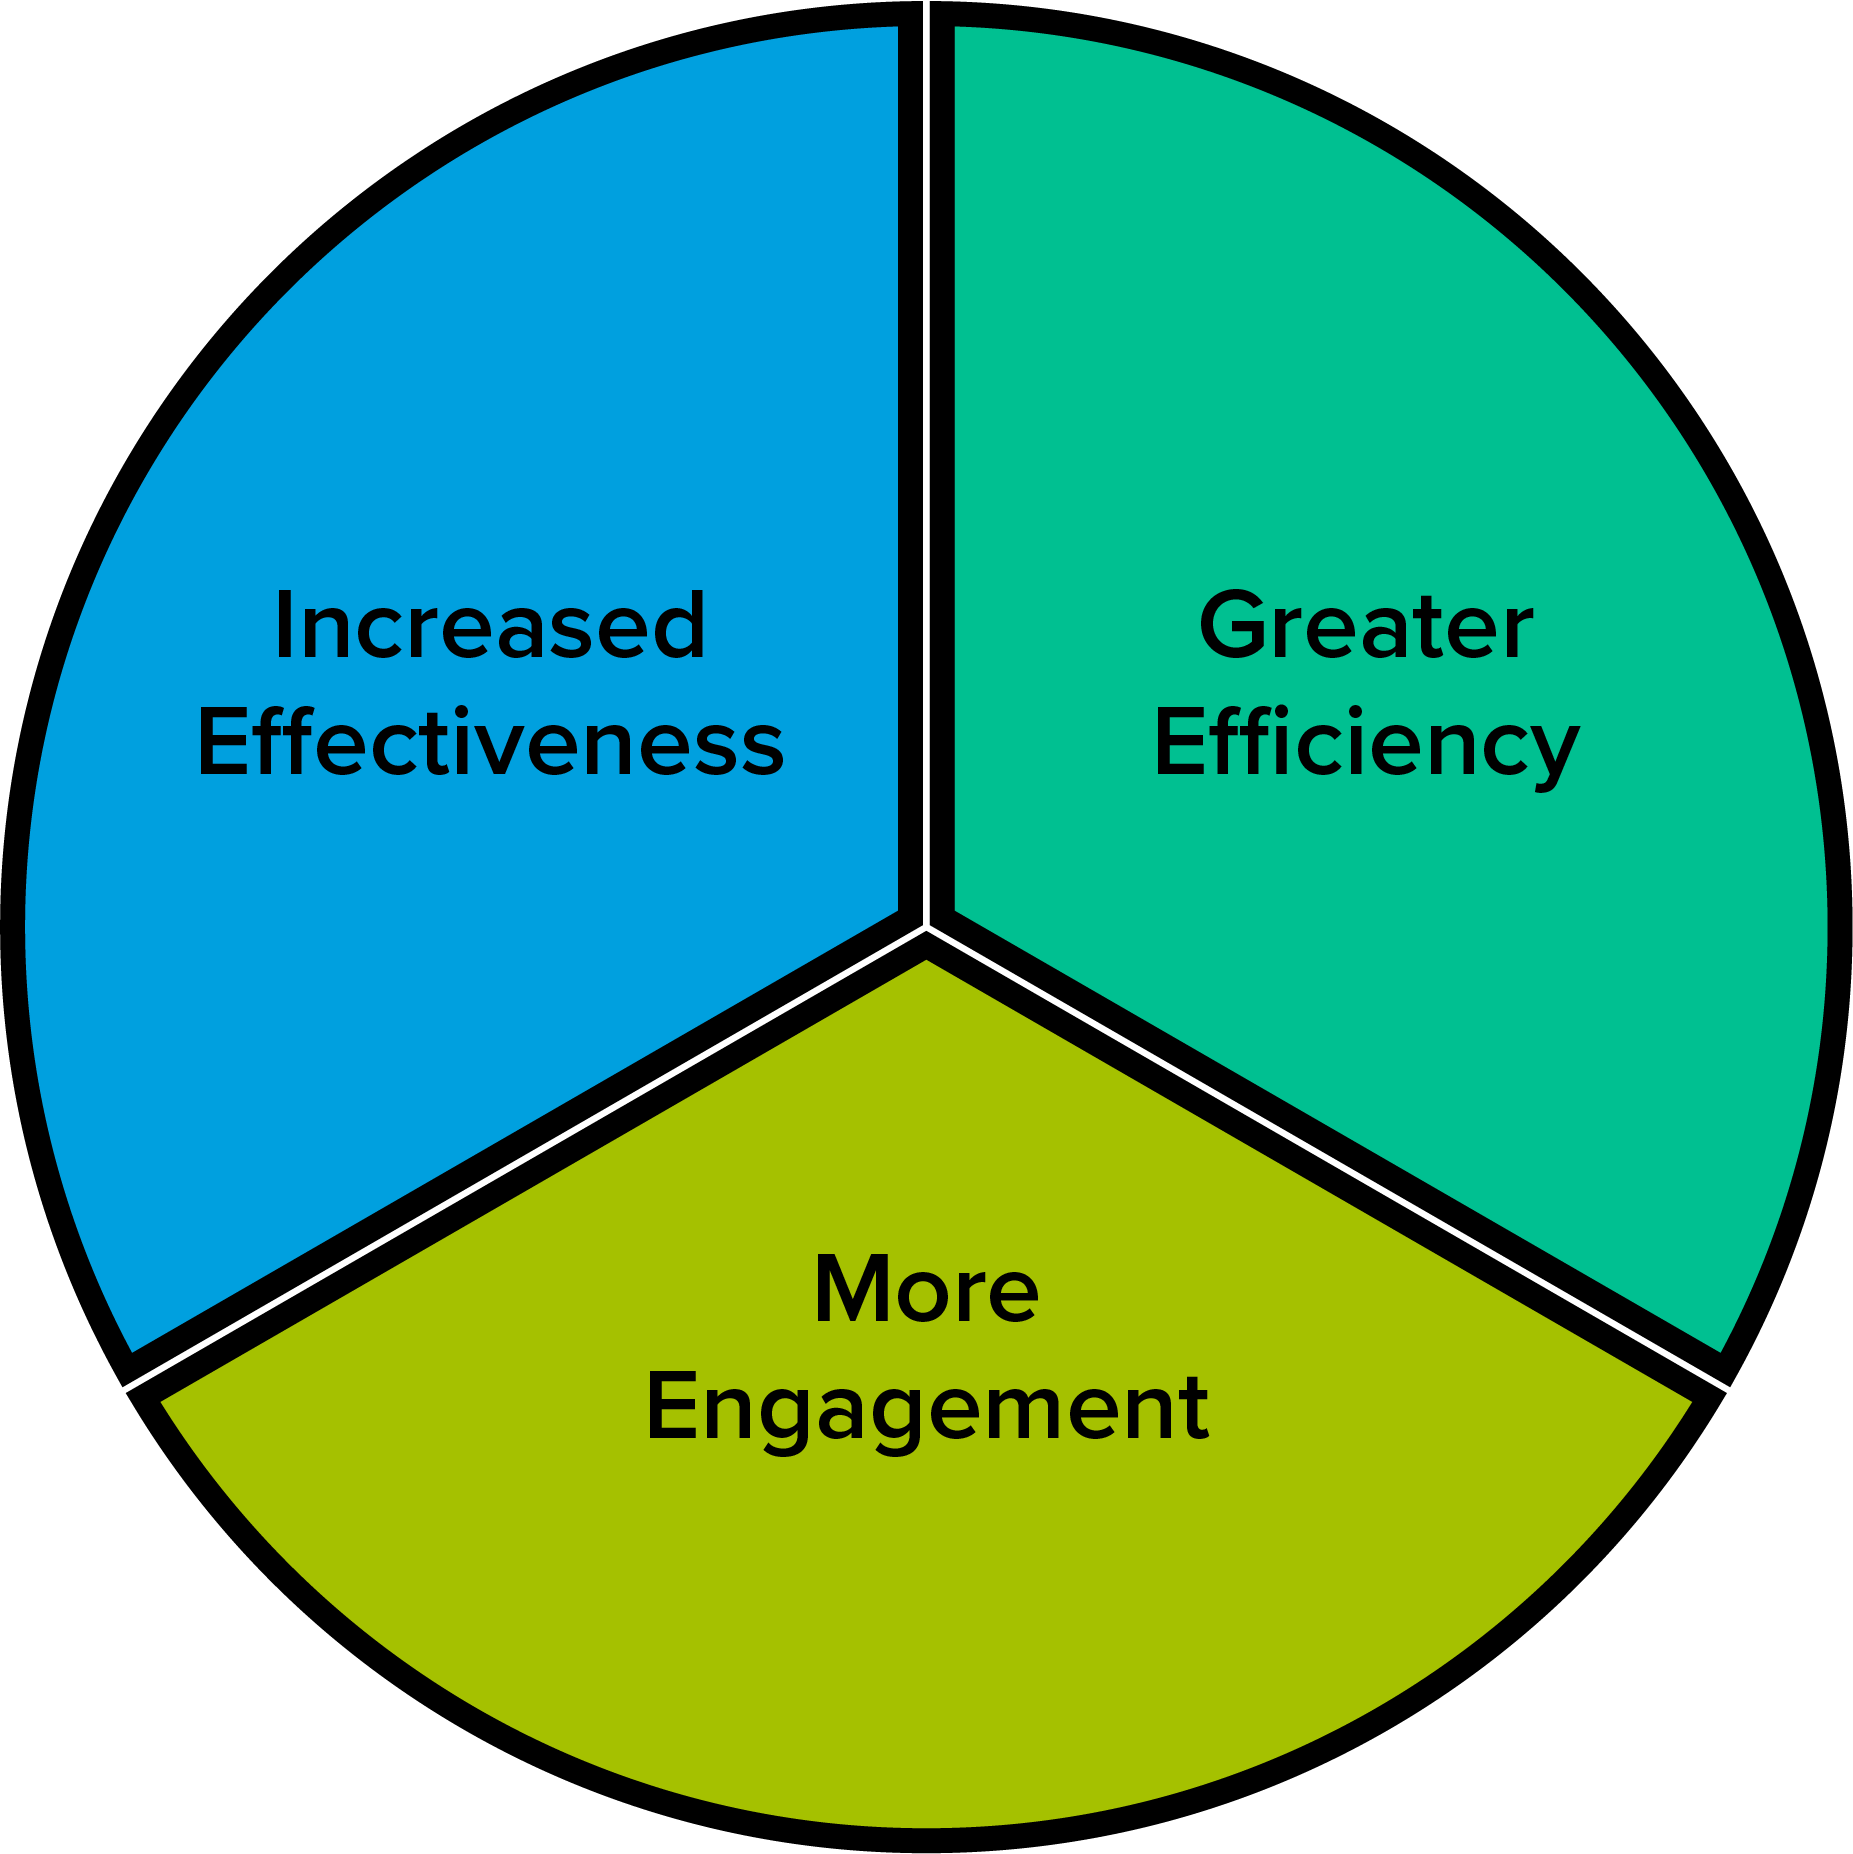 Pie chart divided into three parts: increased effectiveness, greater efficiency, more engagement